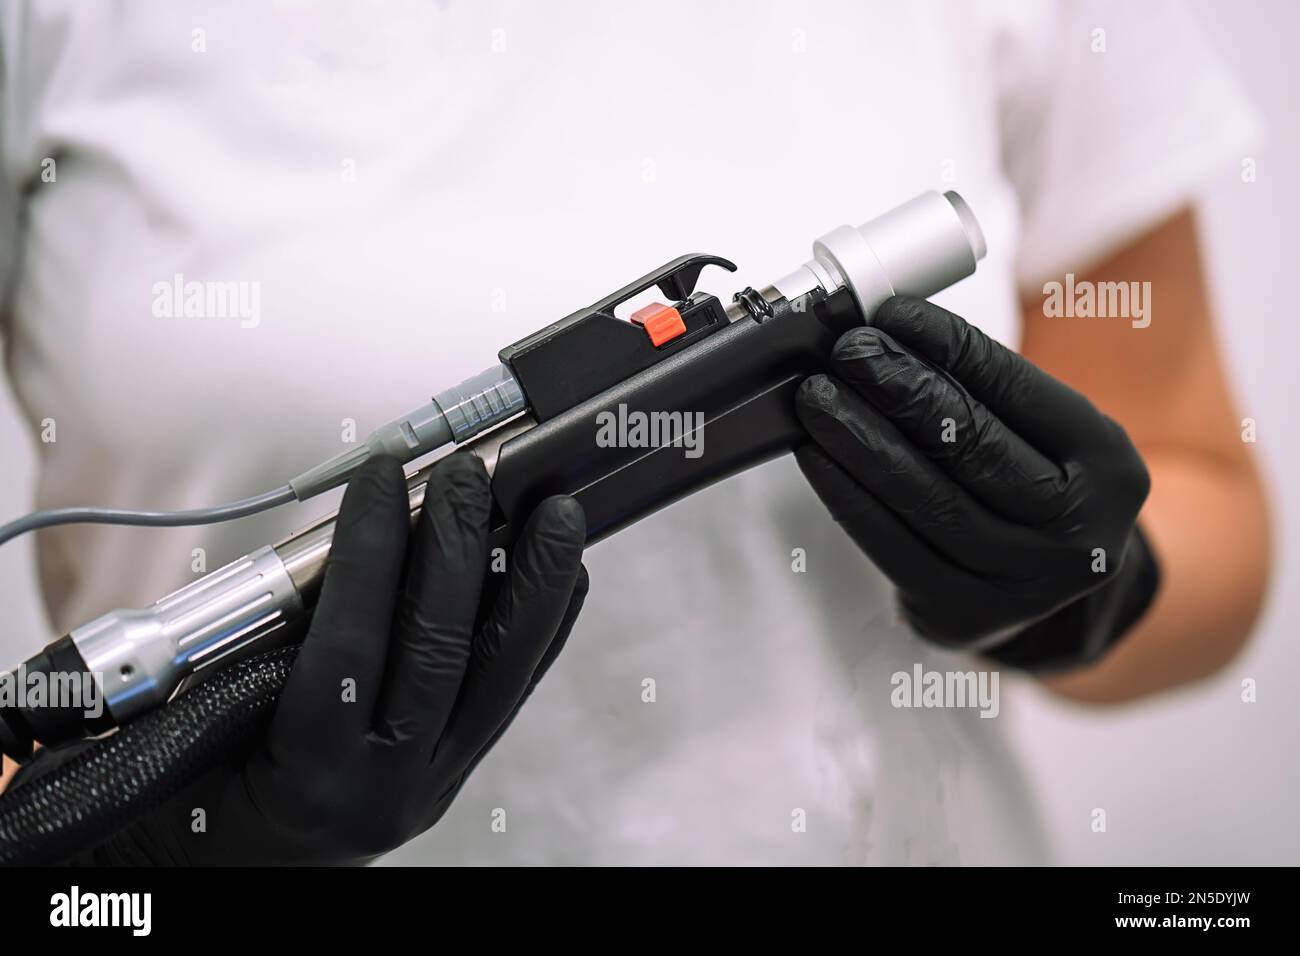 Close up shot of gloved hand with the laser hair removal machine's handpiece. Alexandrite laser techhnology removing hair. Beauty technology concept Stock Photo